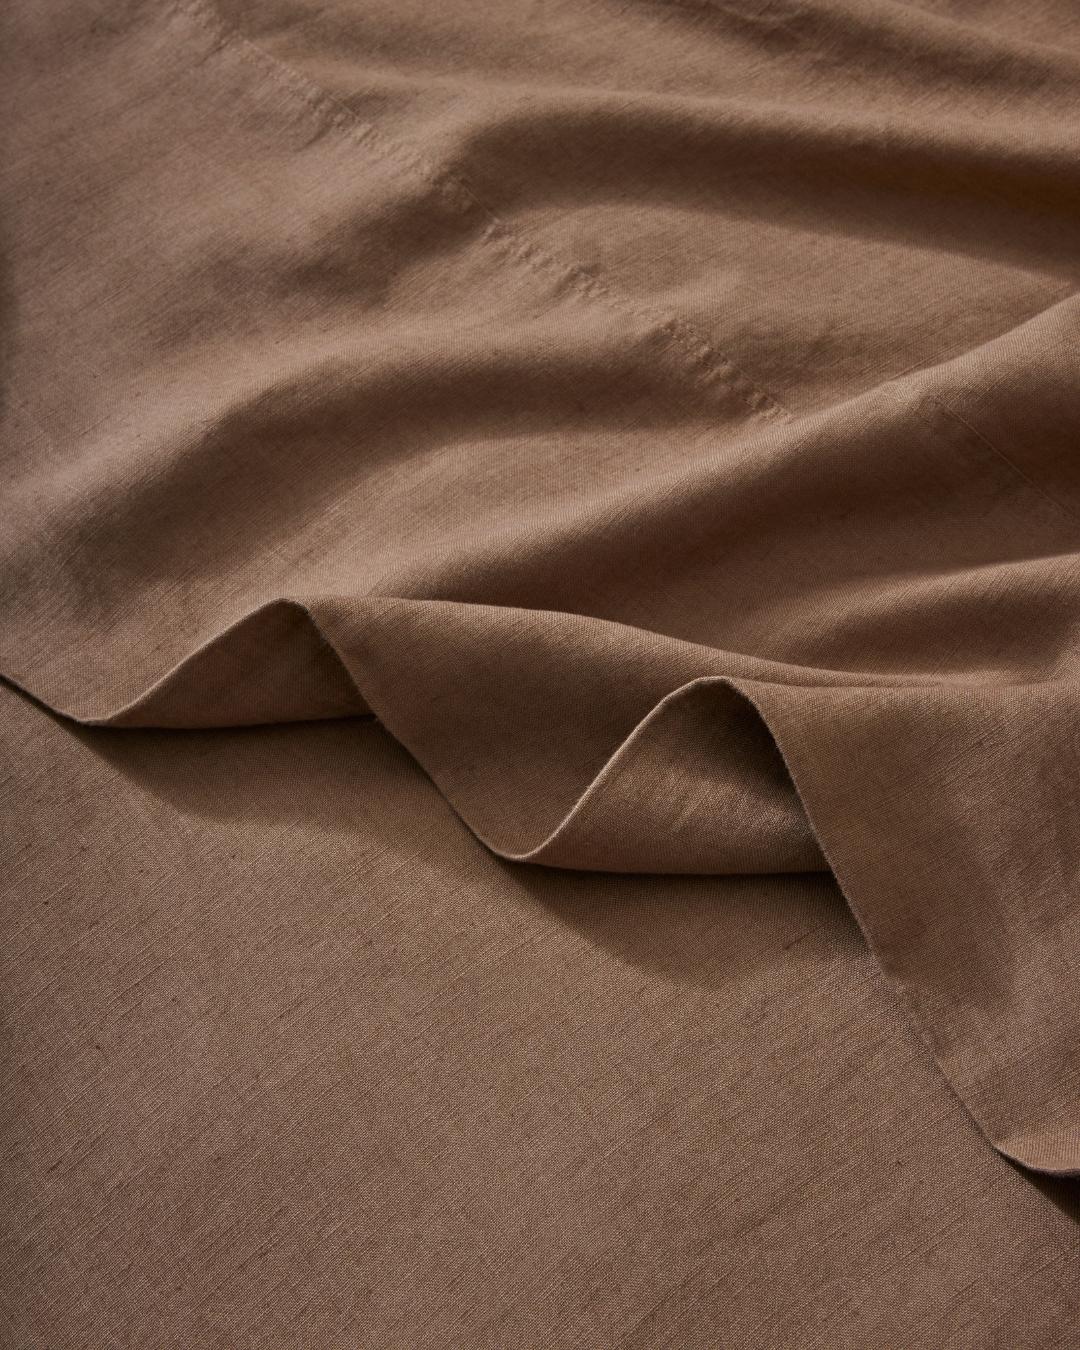 Crafted from the highest quality French Flax Linen. The Biscuit colourway is a beautiful, earthy clay that offers warmth and is bound to softly brighten your bedroom while bringing a warm, cosy feel.